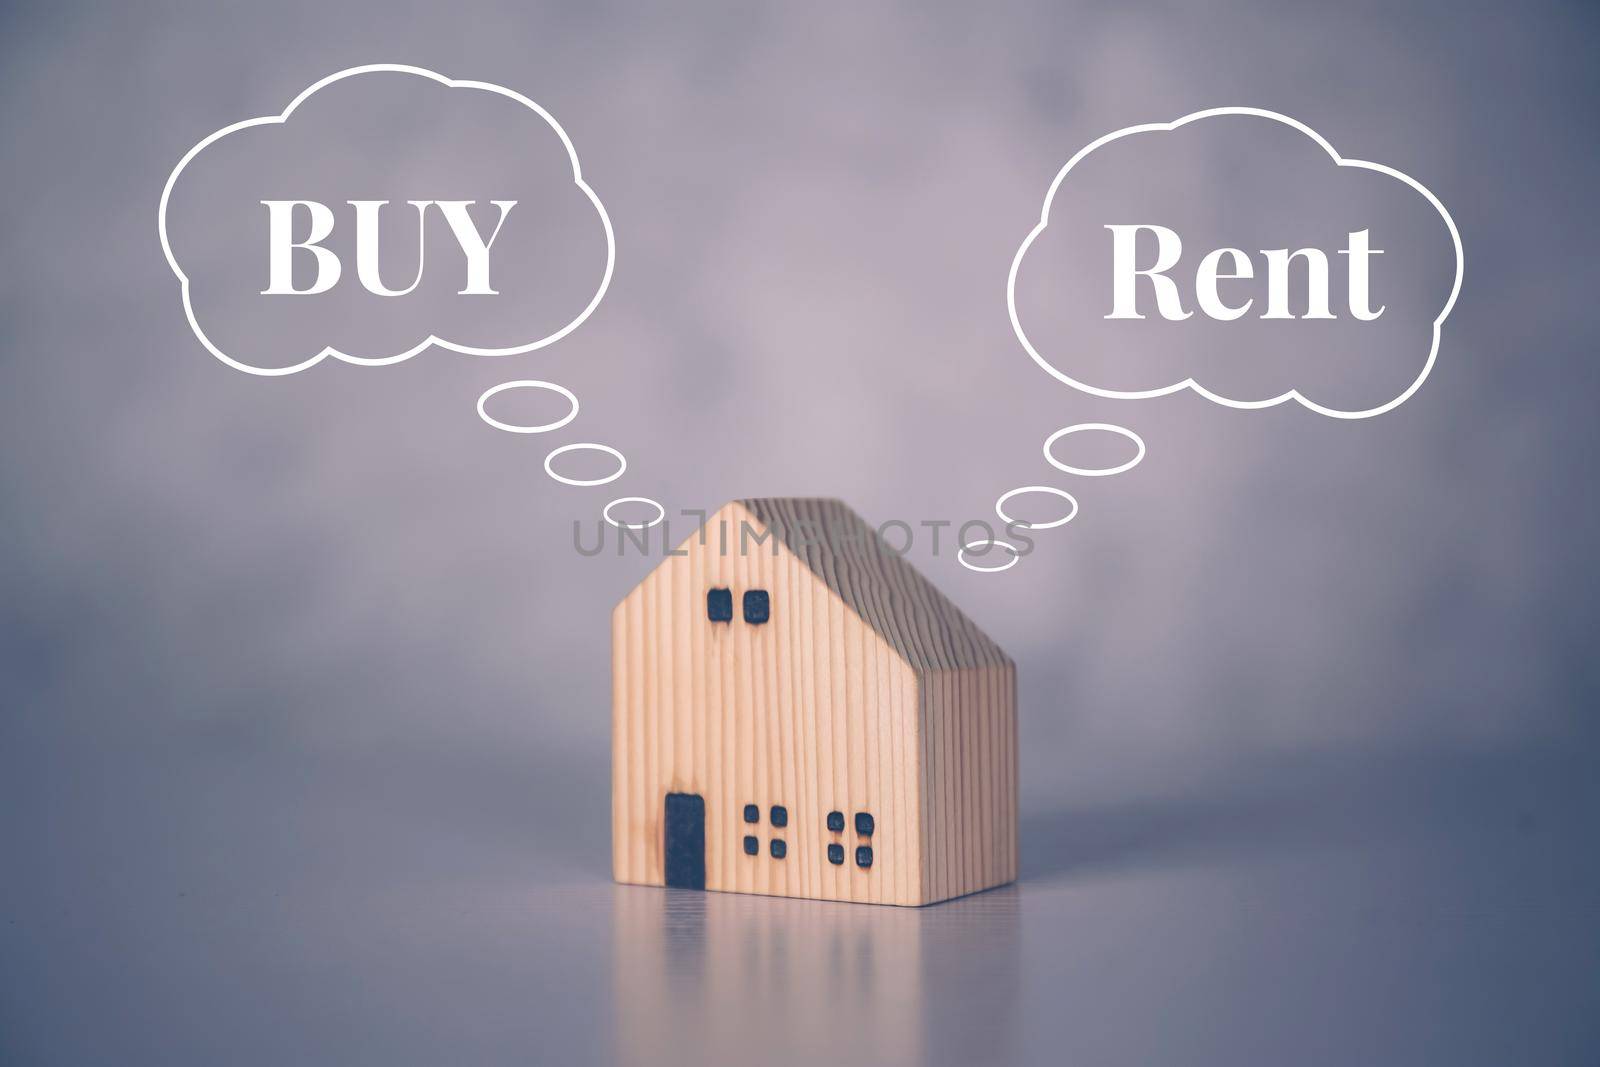 Rent or buy home with real estate for benefits, decision about planning and strategy of house and tax, property with success and saving financial, comparison and advantage, business concept. by nnudoo